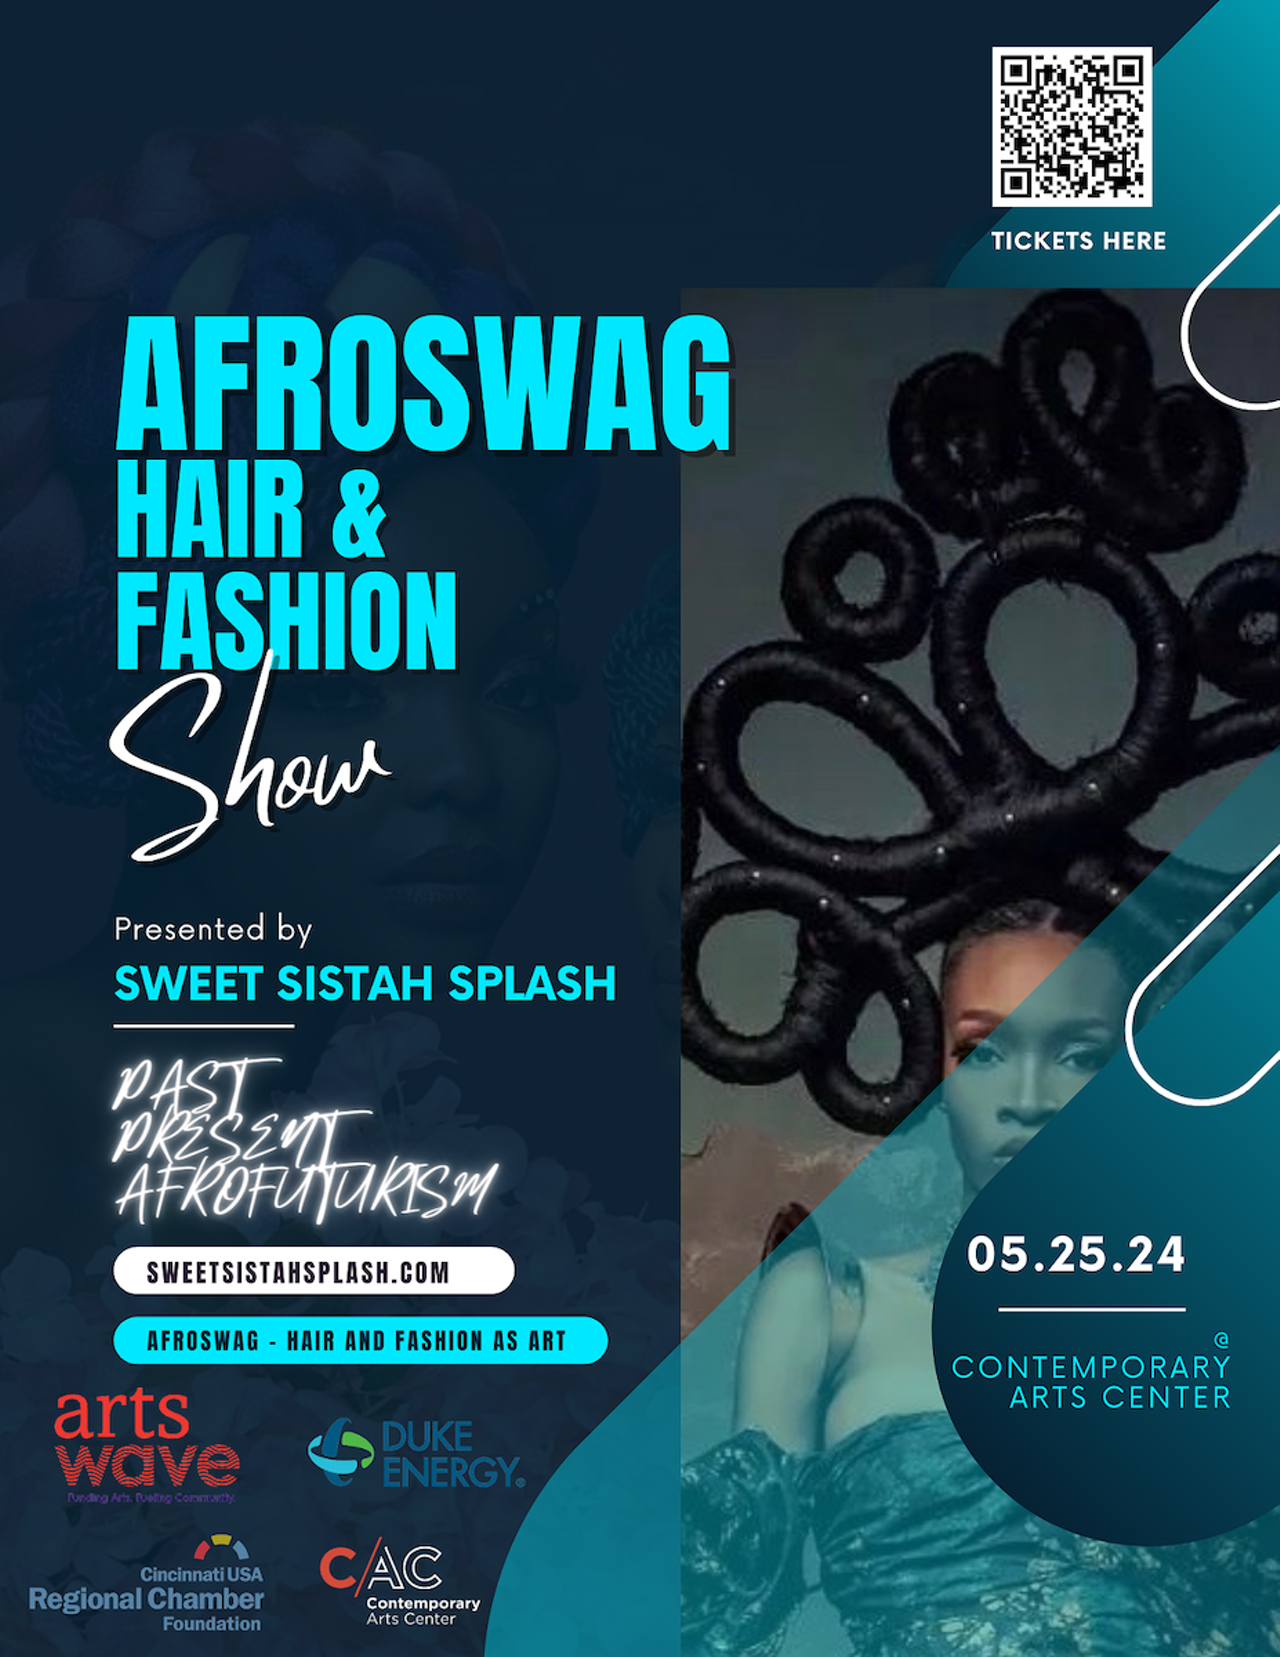 AfroSwag Hair and Fashion Show
When: May 25 from 6-11 p.m.
Where: Contemporary Arts Center, Downtown
What: A showcase of over 40 Black art, fashion and hair artists.
Who: Sweet Sistah Splash
Why: It’s the largest natural hair and fashion experience in the Midwest.